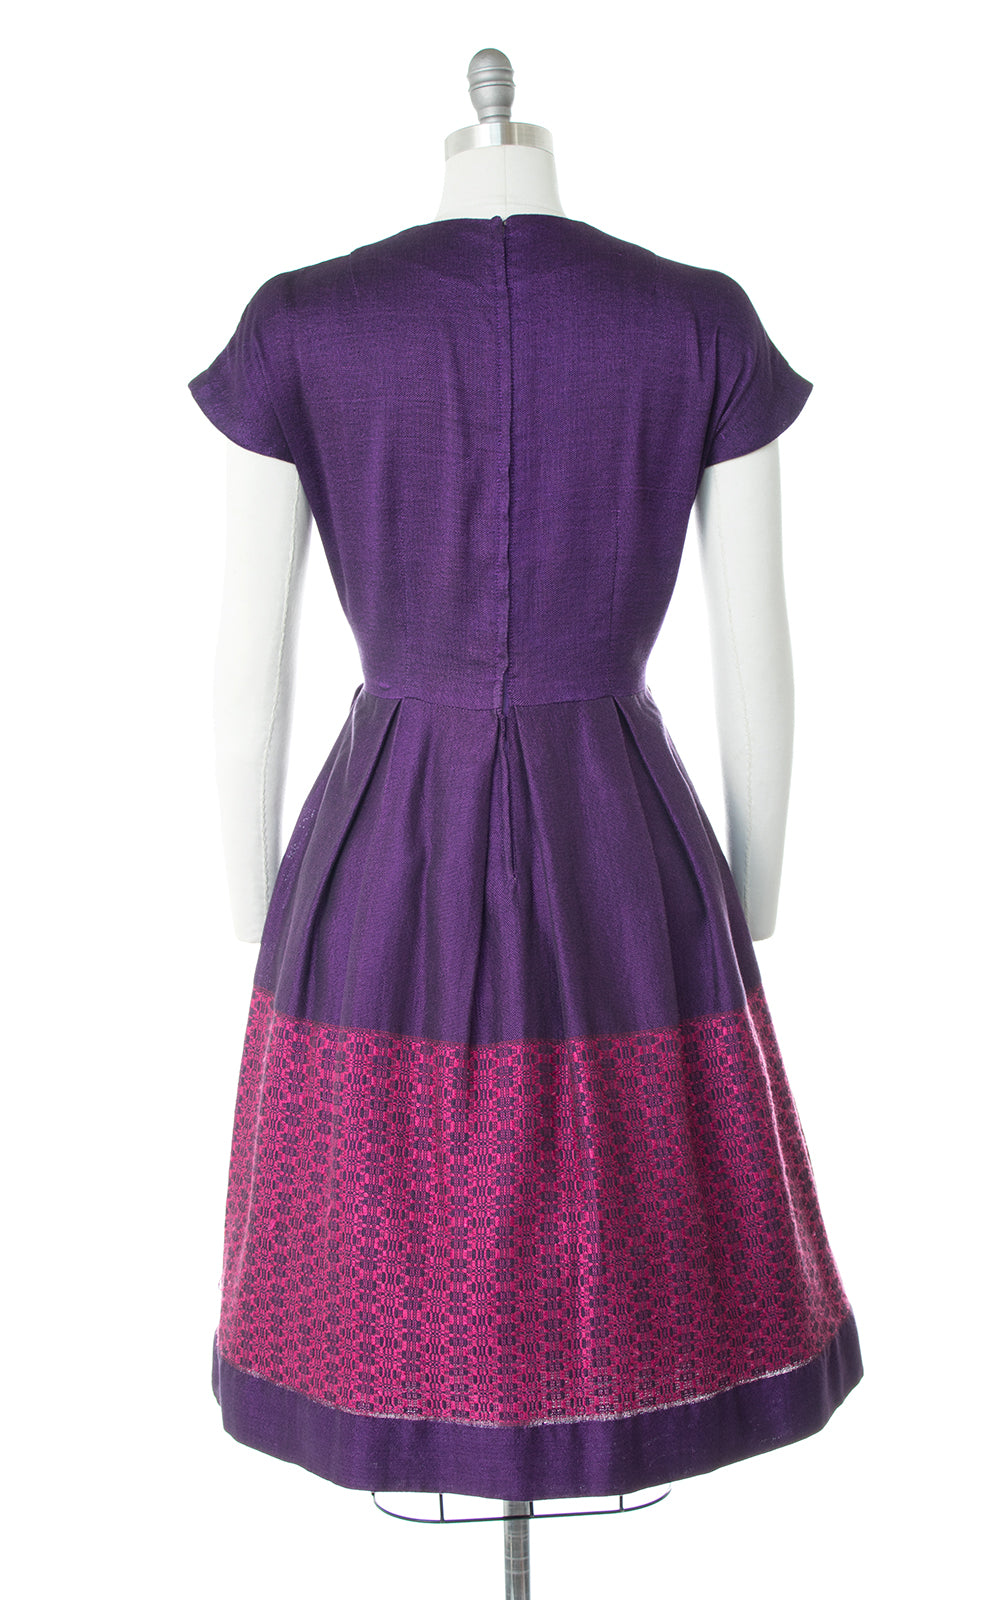 1950s Hand-Loomed Color Block Dress